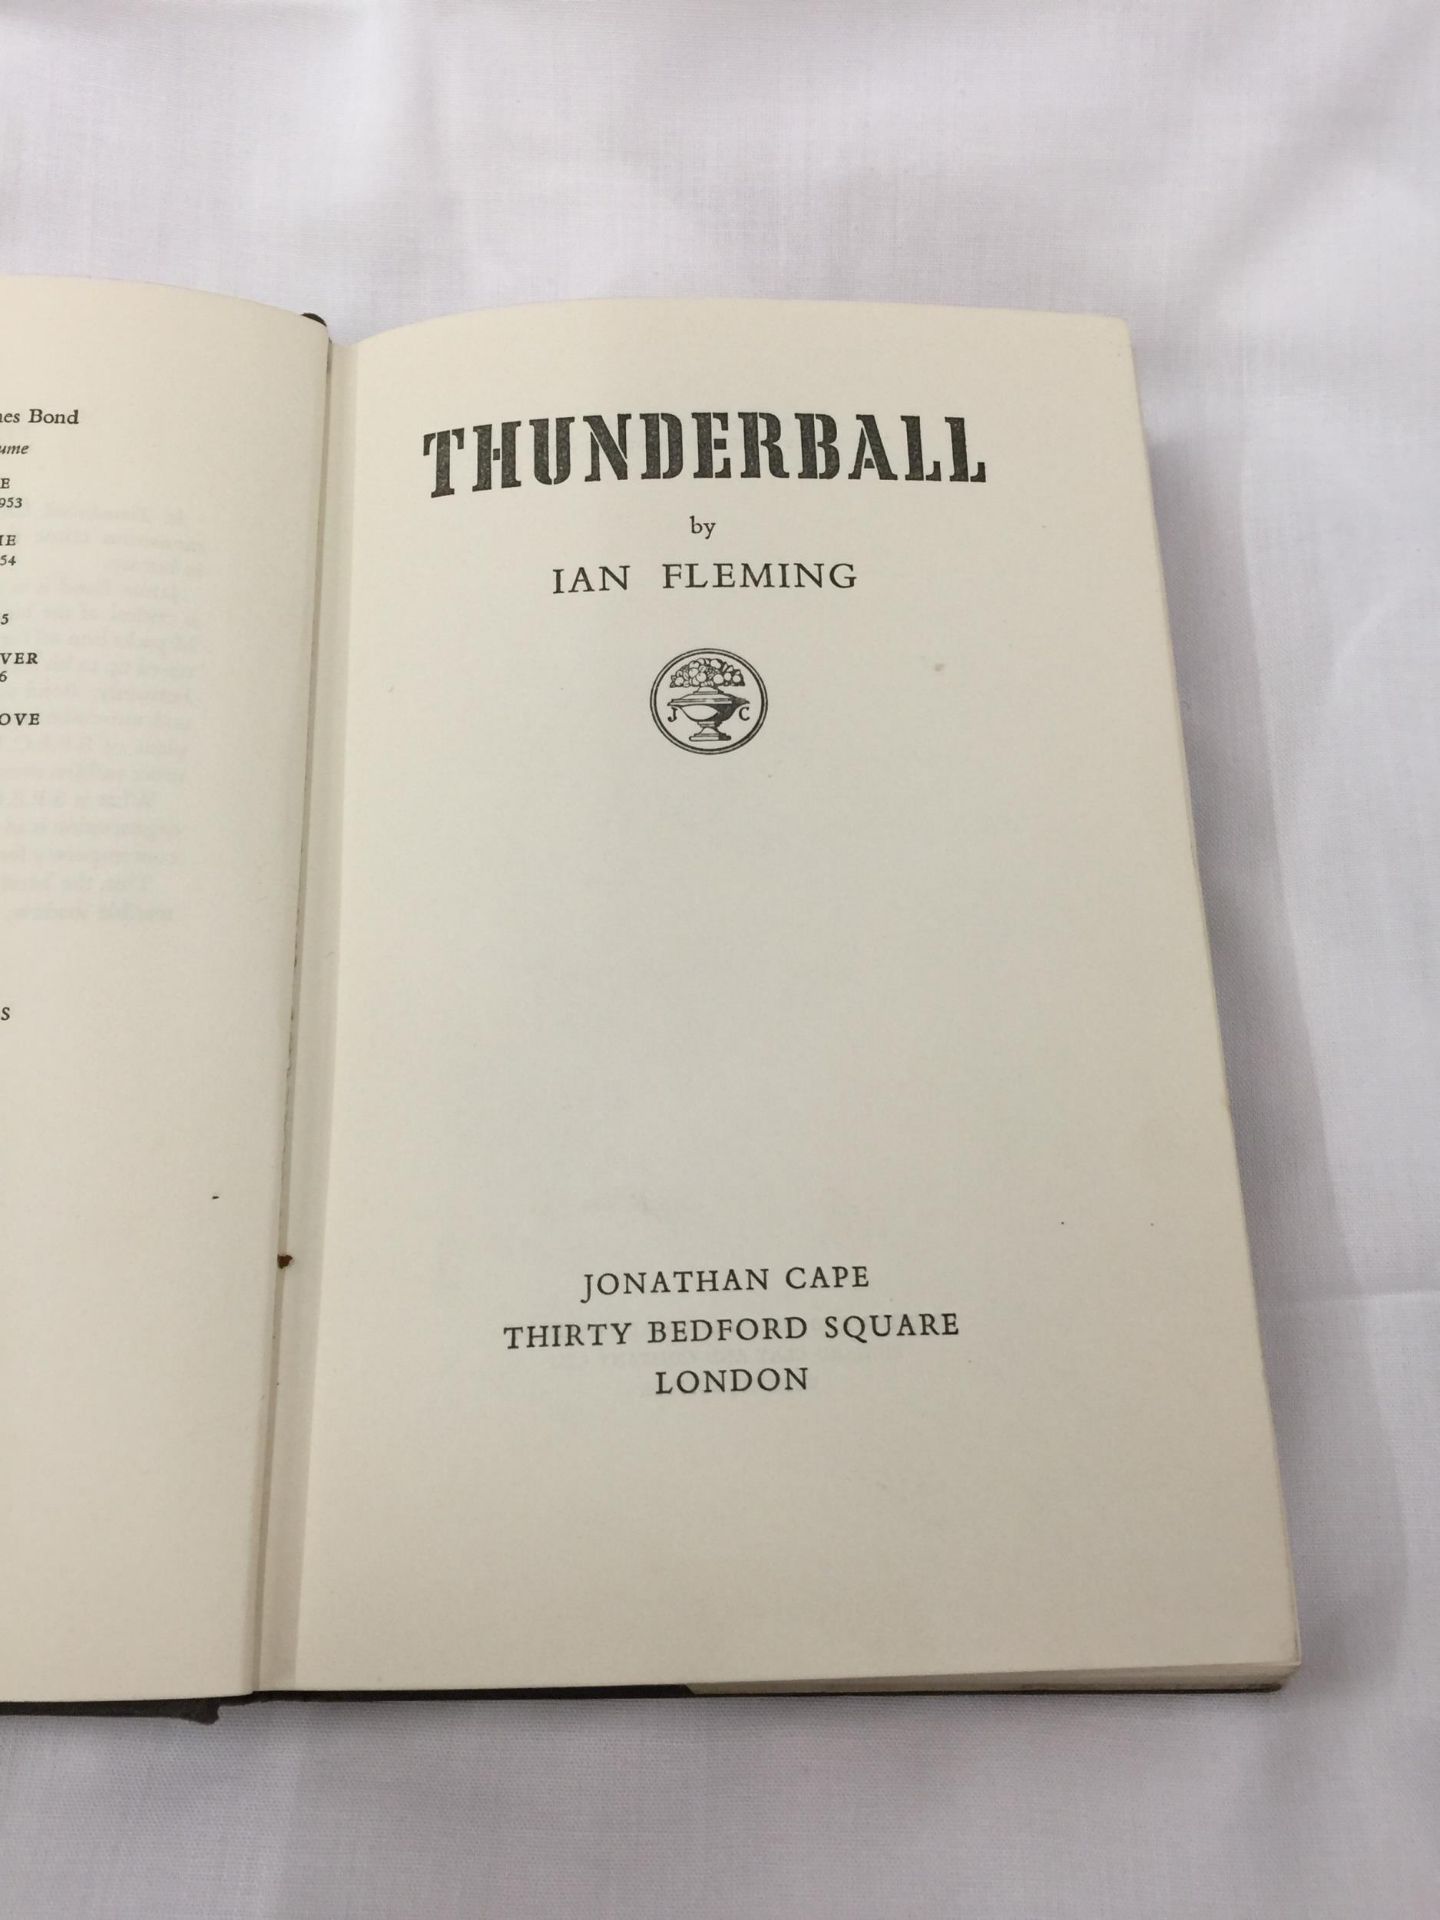 A FIRST EDITION JAMES BOND NOVEL - THUNDERBALL BY IAN FLEMING, HARDBACK WITH ORIGINAL DUST - Image 7 of 12